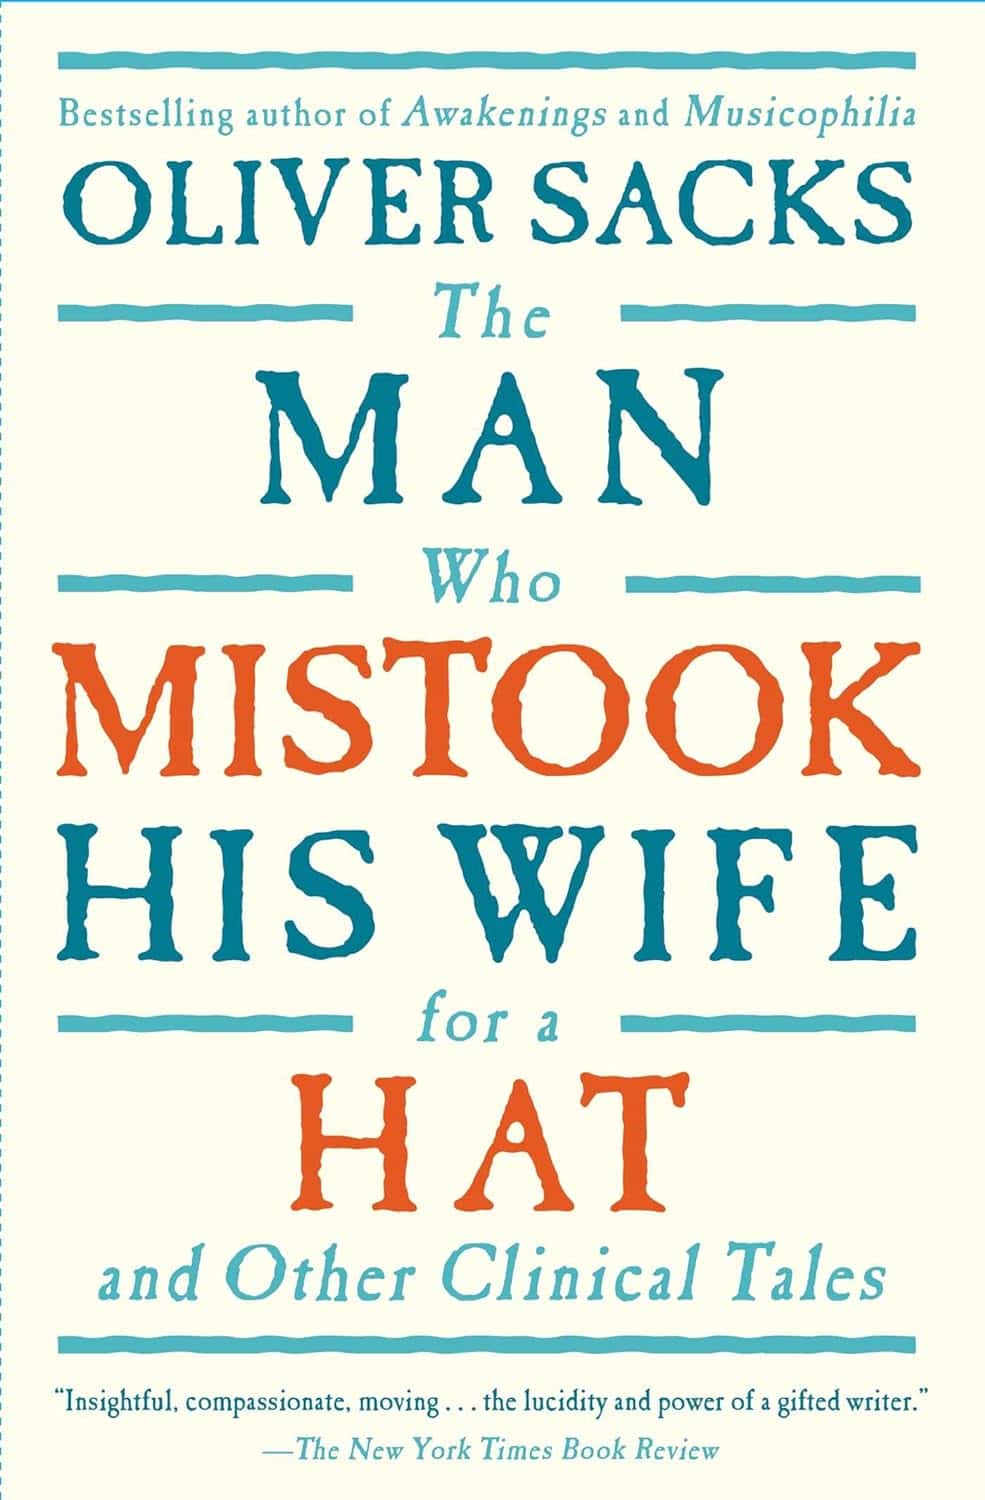 The Man Who Mistook His Wife for a Hat and Other Clinical Tales by Oliver Sacks (1985)